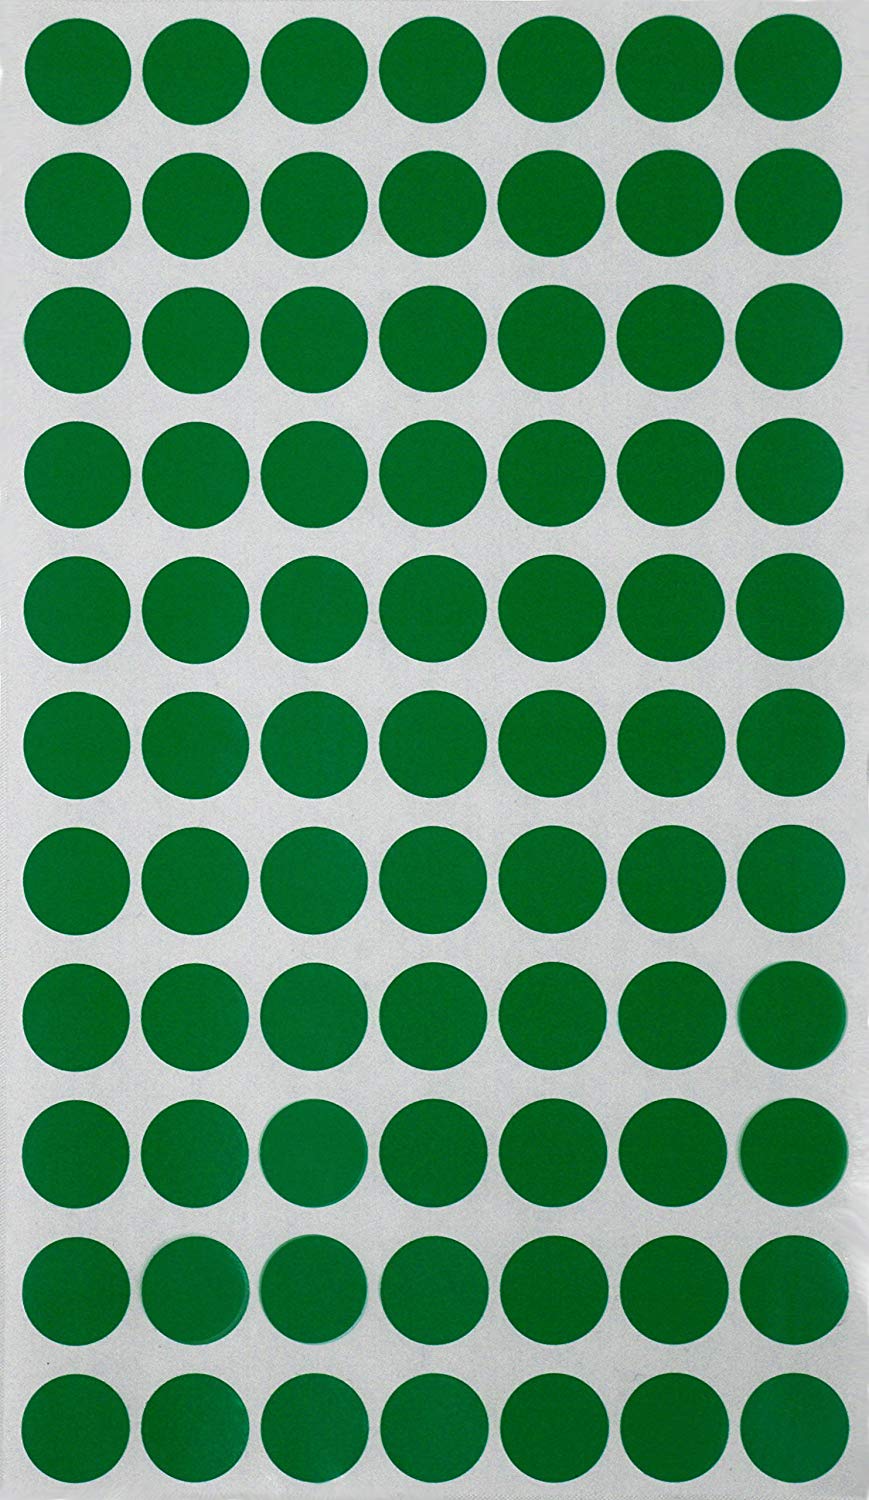 Royal Green Dot Stickers ~ 5/8 inch Classic Colors 15mm 385 / Blue